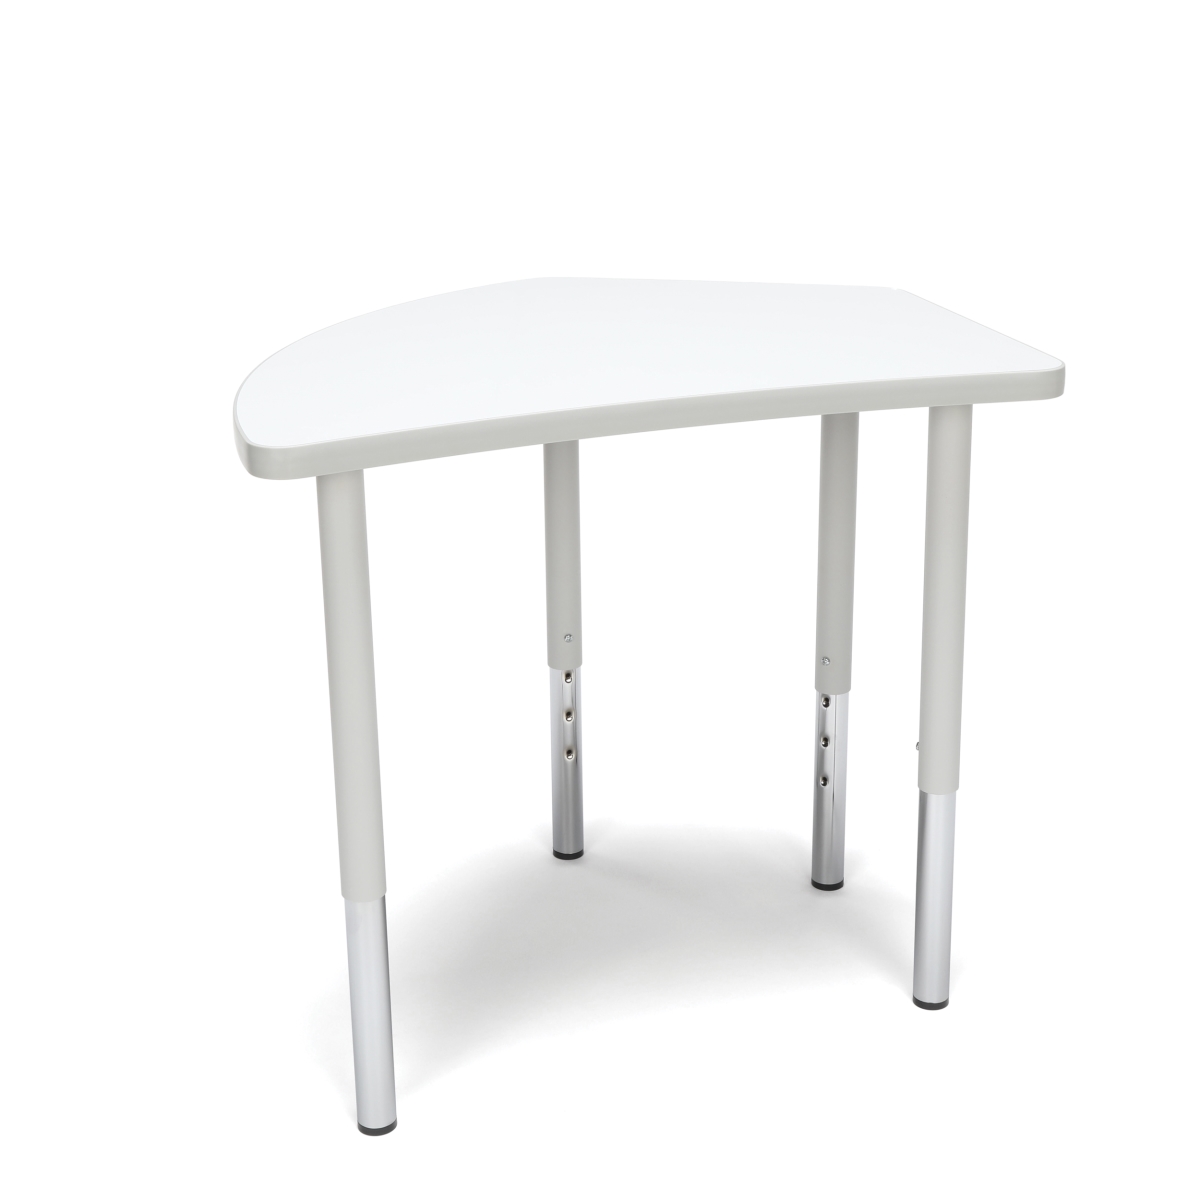 Crest-ll-wht Adapt Series Crescent Standard Table - 23-31 In. Height Adjustable Desk, White